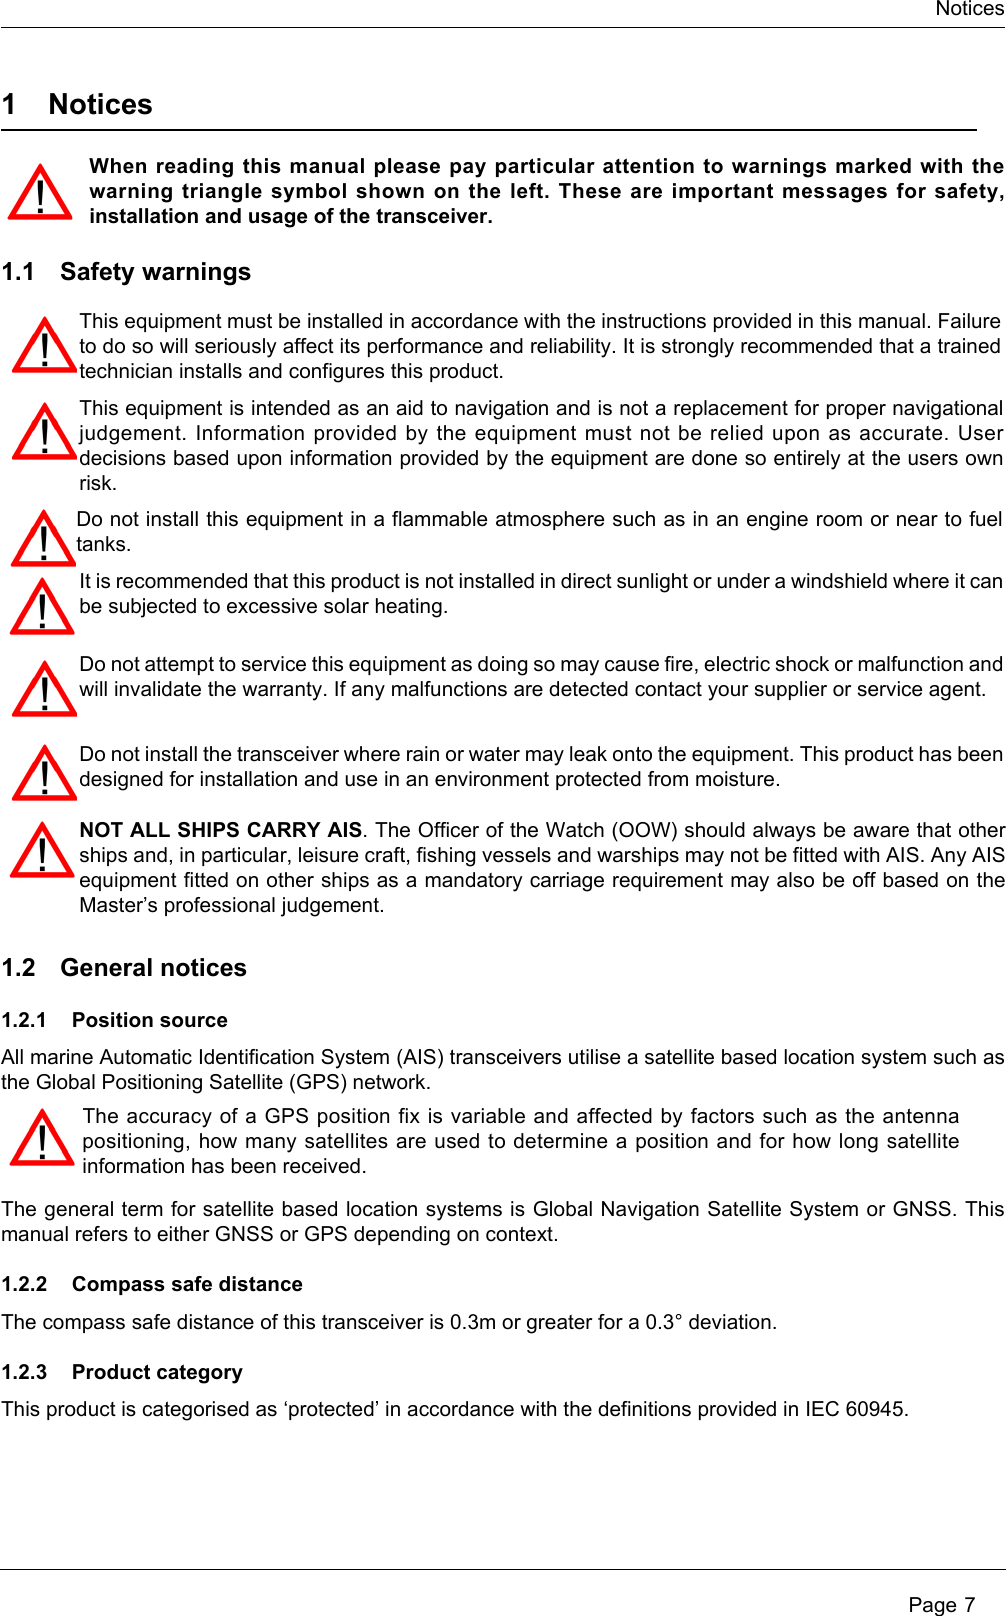 NoticesPage 71NoticesWhen reading this manual please pay particular attention to warnings marked with thewarning triangle symbol shown on the left. These are important messages for safety,installation and usage of the transceiver.1.1 Safety warnings1.2 General notices1.2.1 Position sourceAll marine Automatic Identification System (AIS) transceivers utilise a satellite based location system such asthe Global Positioning Satellite (GPS) network.The general term for satellite based location systems is Global Navigation Satellite System or GNSS. Thismanual refers to either GNSS or GPS depending on context. 1.2.2 Compass safe distanceThe compass safe distance of this transceiver is 0.3m or greater for a 0.3° deviation.1.2.3 Product categoryThis product is categorised as ‘protected’ in accordance with the definitions provided in IEC 60945.The accuracy of a GPS position fix is variable and affected by factors such as the antennapositioning, how many satellites are used to determine a position and for how long satelliteinformation has been received.This equipment must be installed in accordance with the instructions provided in this manual. Failureto do so will seriously affect its performance and reliability. It is strongly recommended that a trainedtechnician installs and configures this product.This equipment is intended as an aid to navigation and is not a replacement for proper navigationaljudgement. Information provided by the equipment must not be relied upon as accurate. Userdecisions based upon information provided by the equipment are done so entirely at the users ownrisk.Do not install this equipment in a flammable atmosphere such as in an engine room or near to fueltanks.Do not attempt to service this equipment as doing so may cause fire, electric shock or malfunction andwill invalidate the warranty. If any malfunctions are detected contact your supplier or service agent.Do not install the transceiver where rain or water may leak onto the equipment. This product has beendesigned for installation and use in an environment protected from moisture.NOT ALL SHIPS CARRY AIS. The Officer of the Watch (OOW) should always be aware that otherships and, in particular, leisure craft, fishing vessels and warships may not be fitted with AIS. Any AISequipment fitted on other ships as a mandatory carriage requirement may also be off based on theMaster’s professional judgement.It is recommended that this product is not installed in direct sunlight or under a windshield where it canbe subjected to excessive solar heating. 